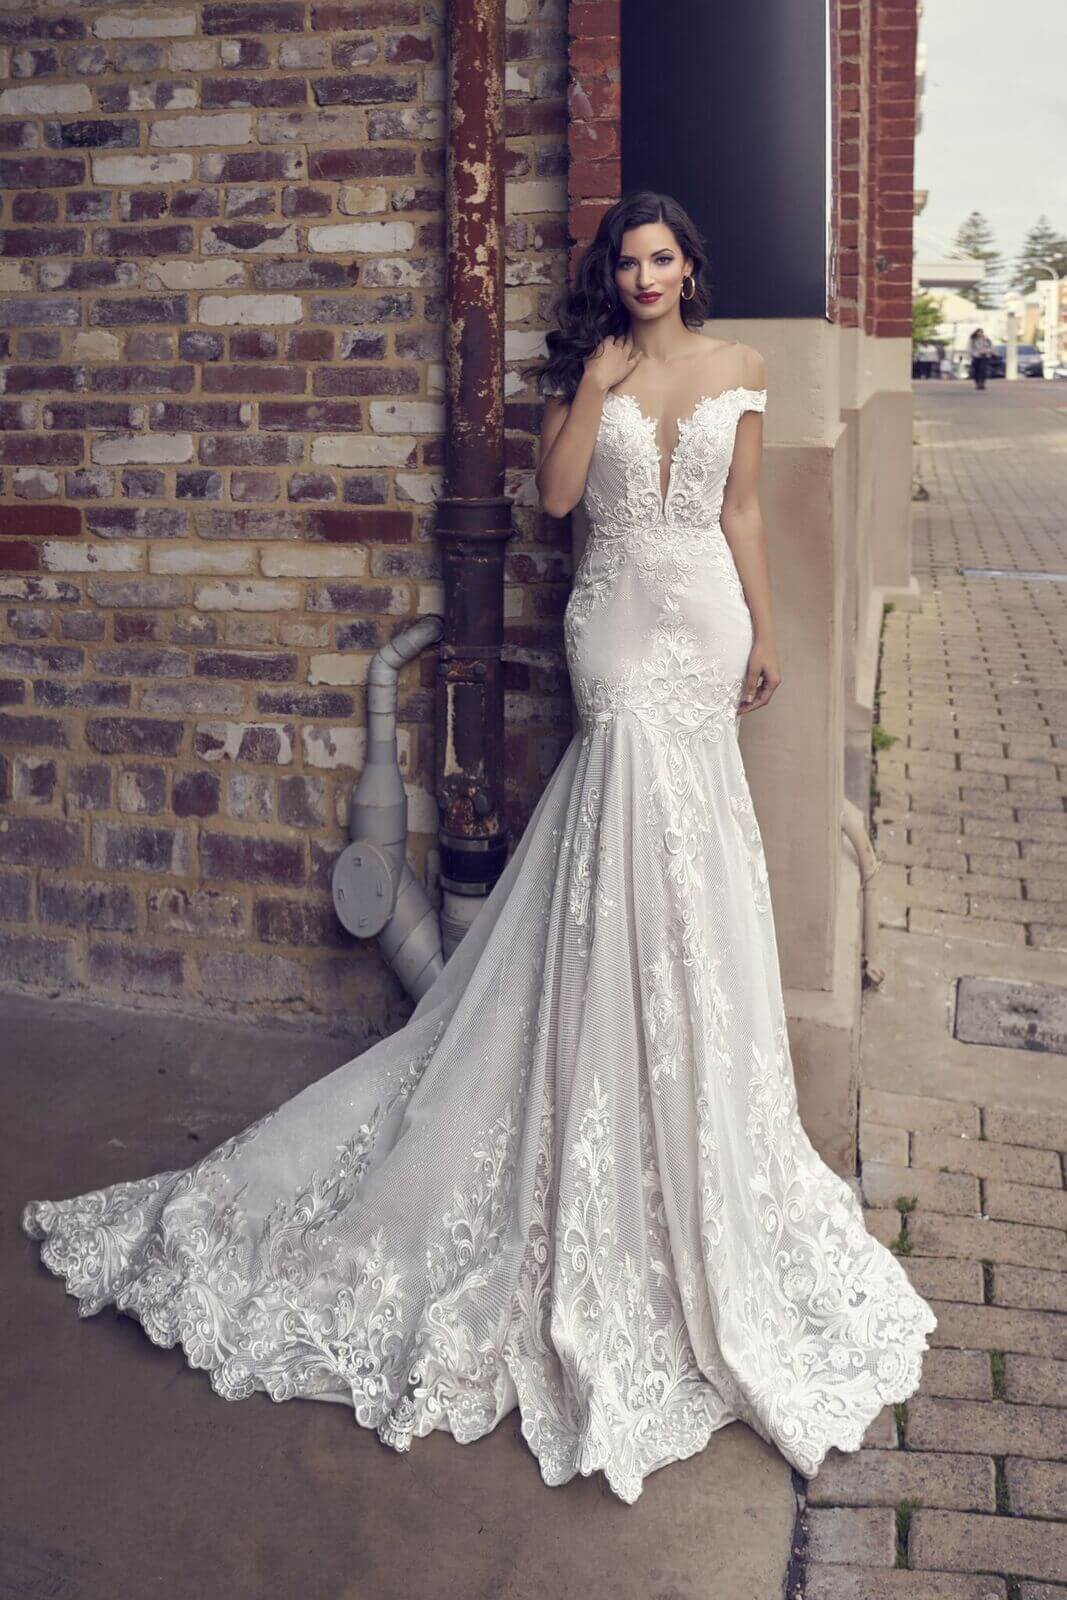 Model is wearing a 2022 Bridal Gown by Top Wedding Dresses Designer ZAVANA, Style Number ZB245, available at Romantique Bridal, Magherafelt Northern Ireland